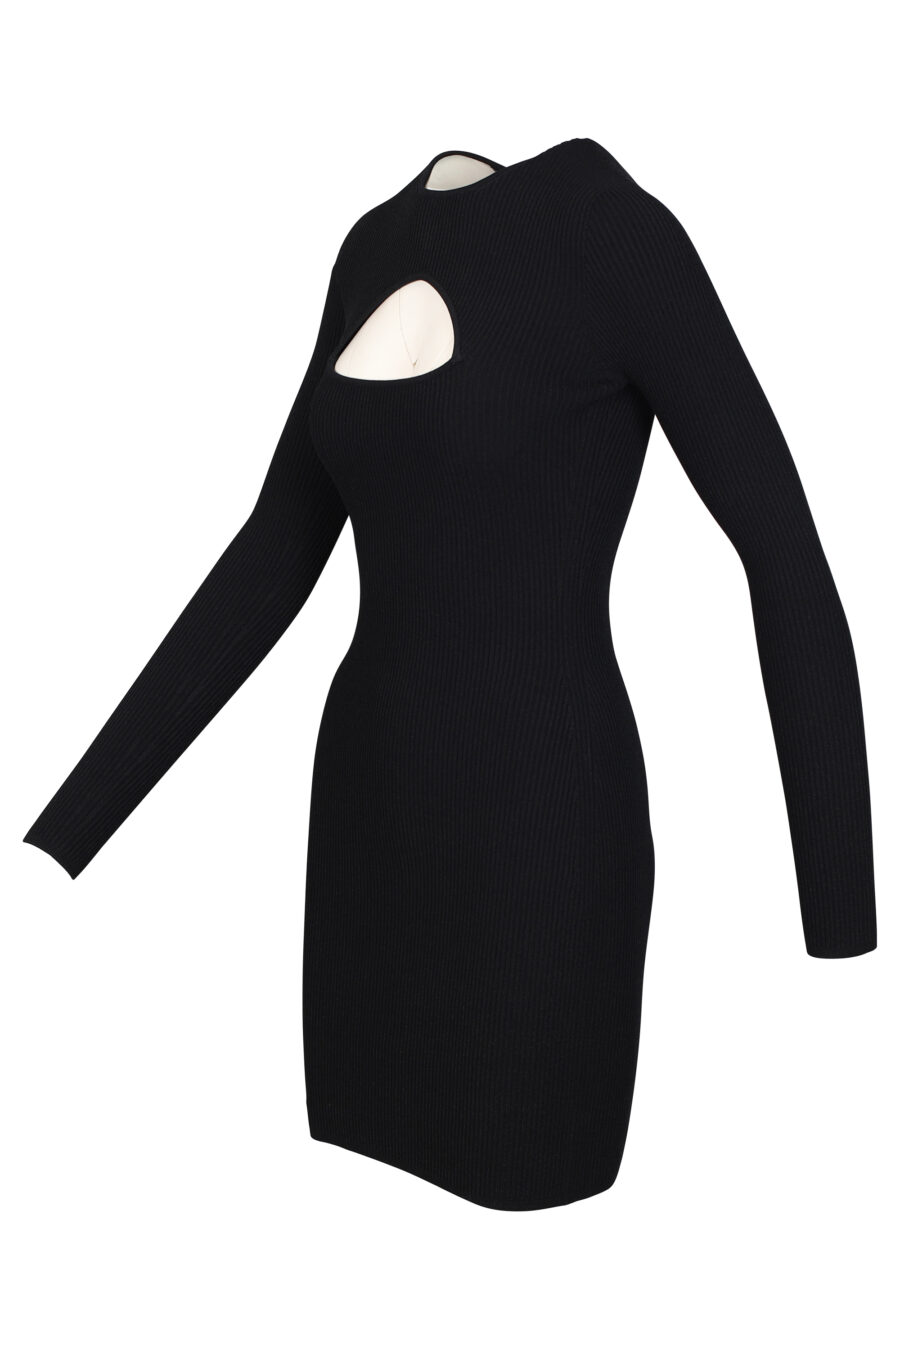 Short black "Cut-Out" dress with long sleeves and neckline - 8054148010836 2